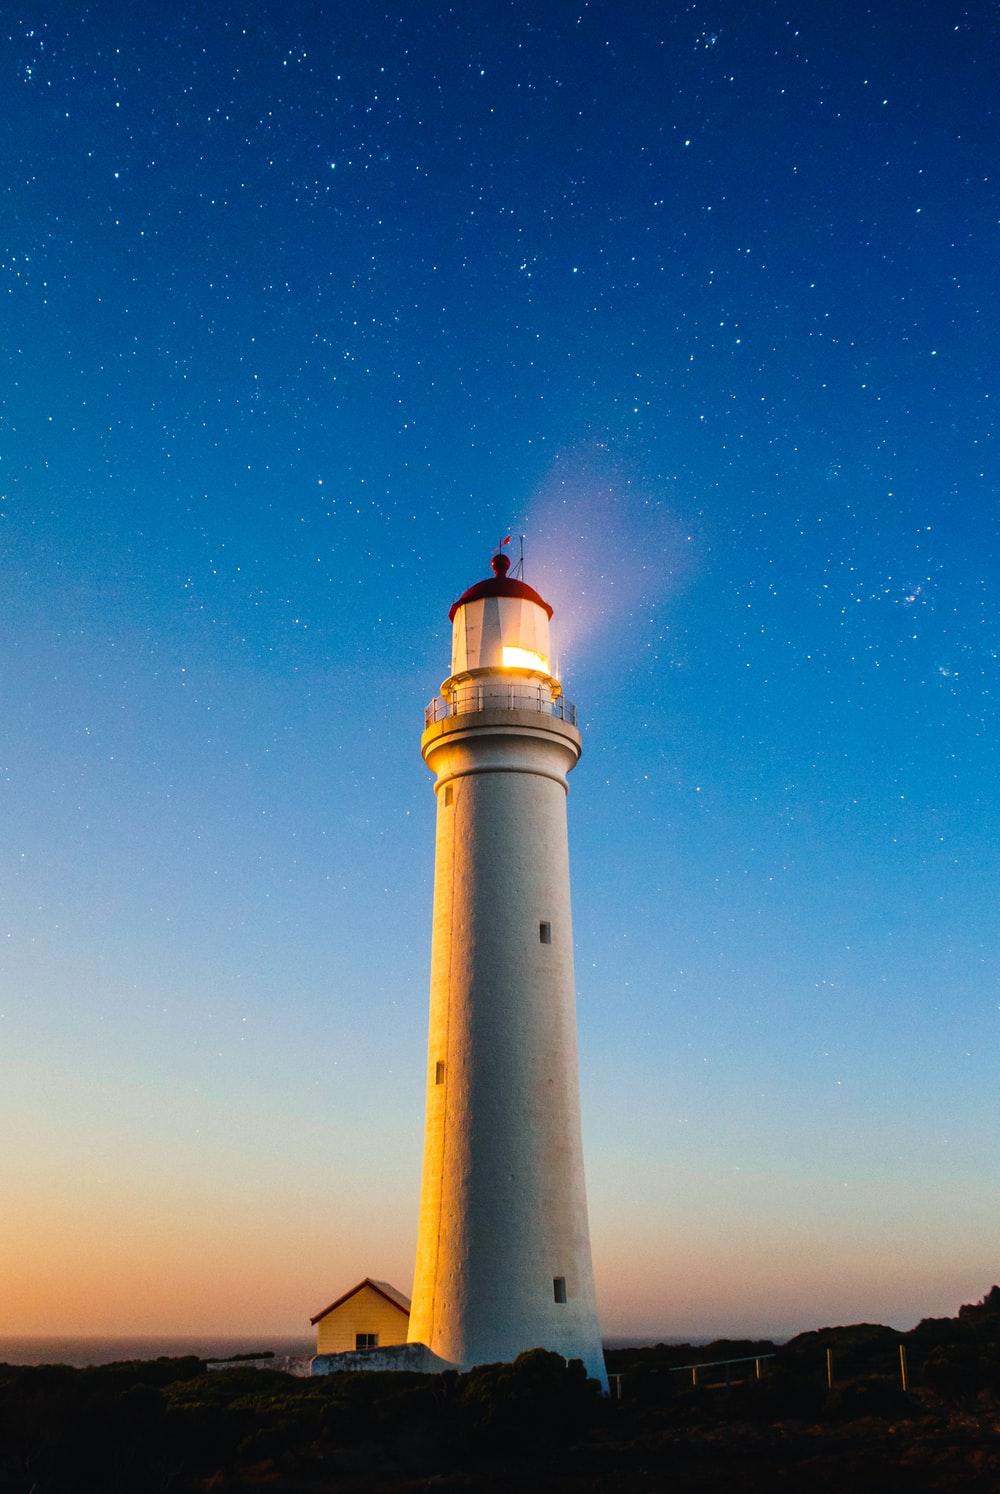 Lighthouse Image: Download HD Picture & Photo